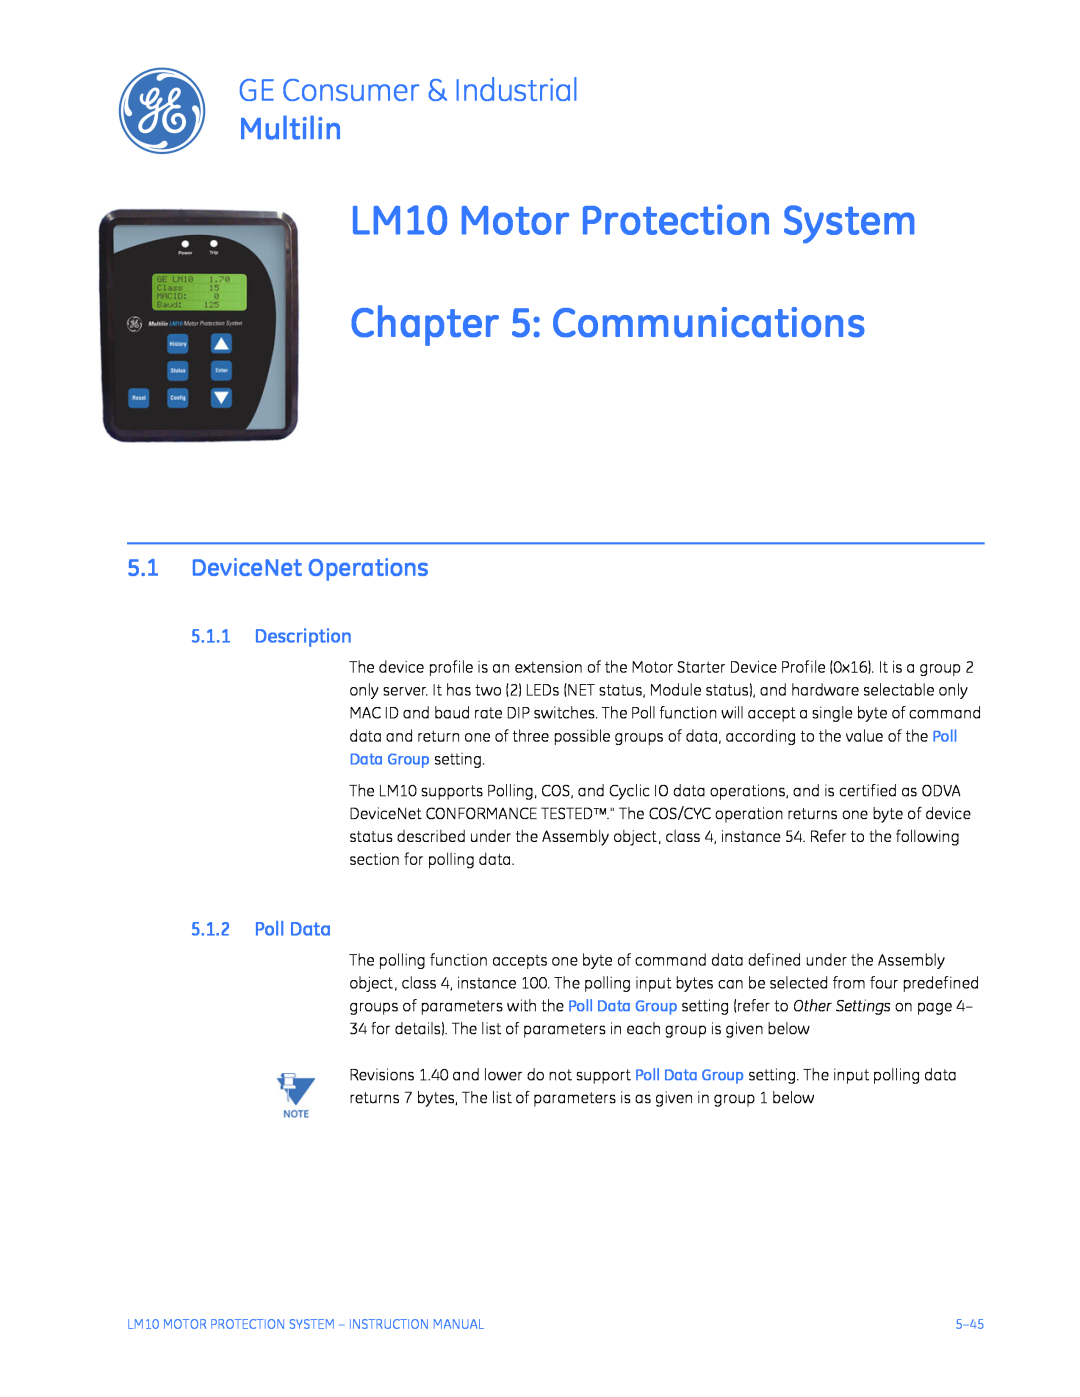 GE LM10 Motor Protection System Communications, DeviceNet Operations, Description, Poll Data, GE Consumer & Industrial 